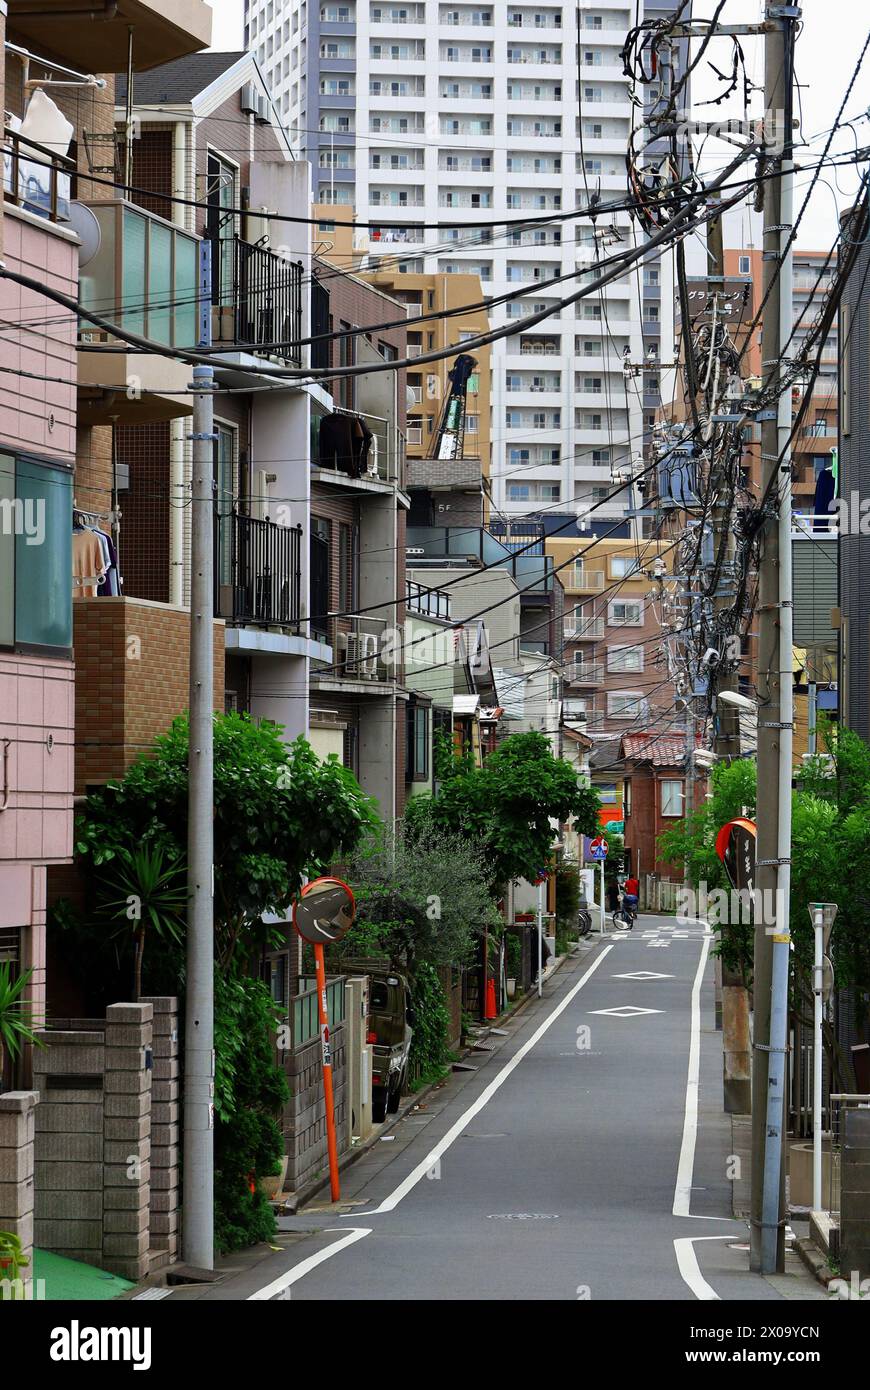 Daily life in Japan  Scenery of a residential area in Kawasaki where tower apartments can be seen Stock Photo